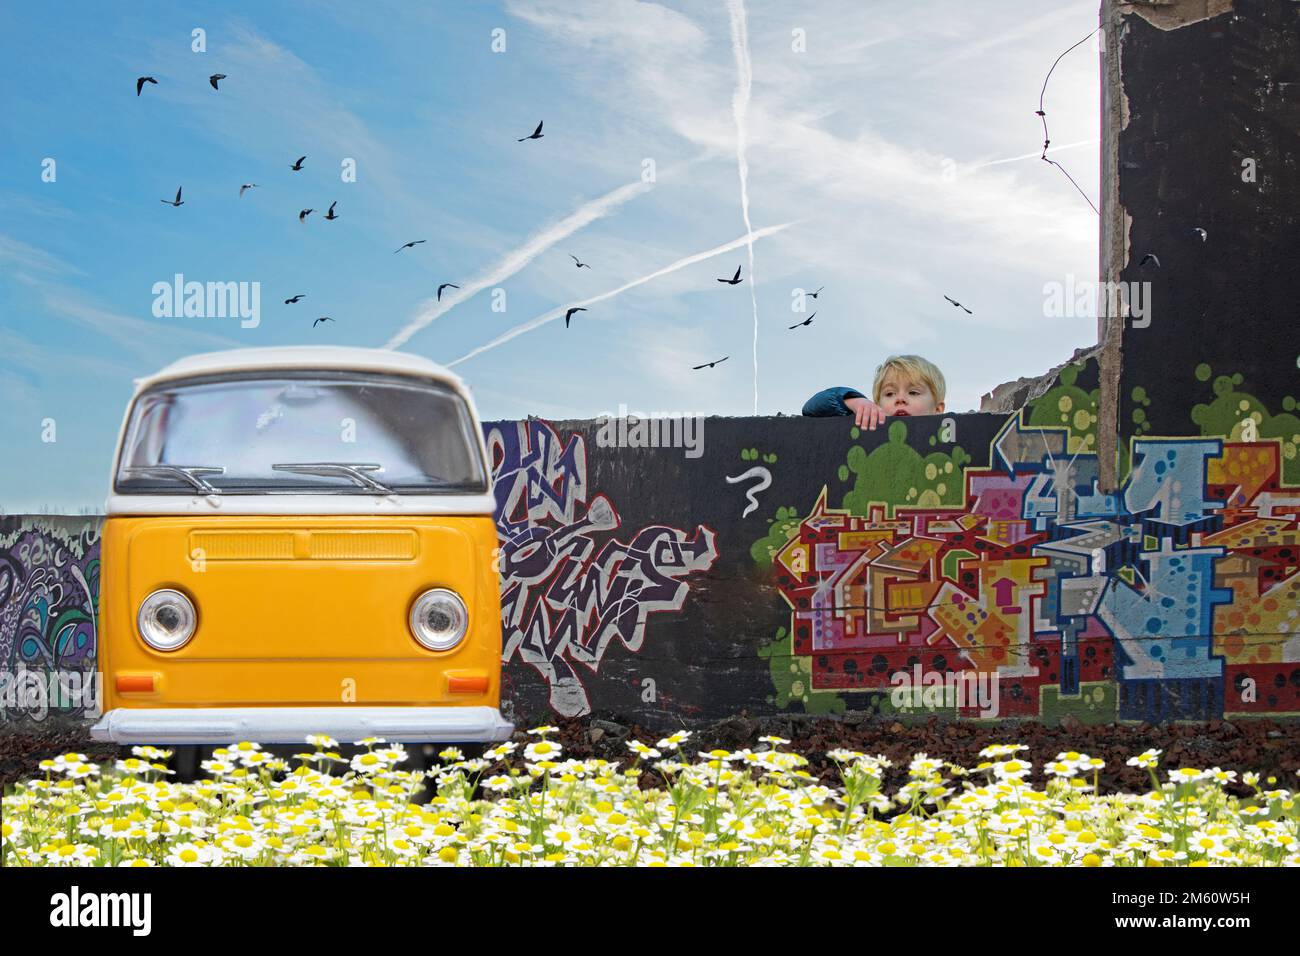 Young boy climbing the wall to see the yellow old car parked in the front of a graffiti wall Stock Photo